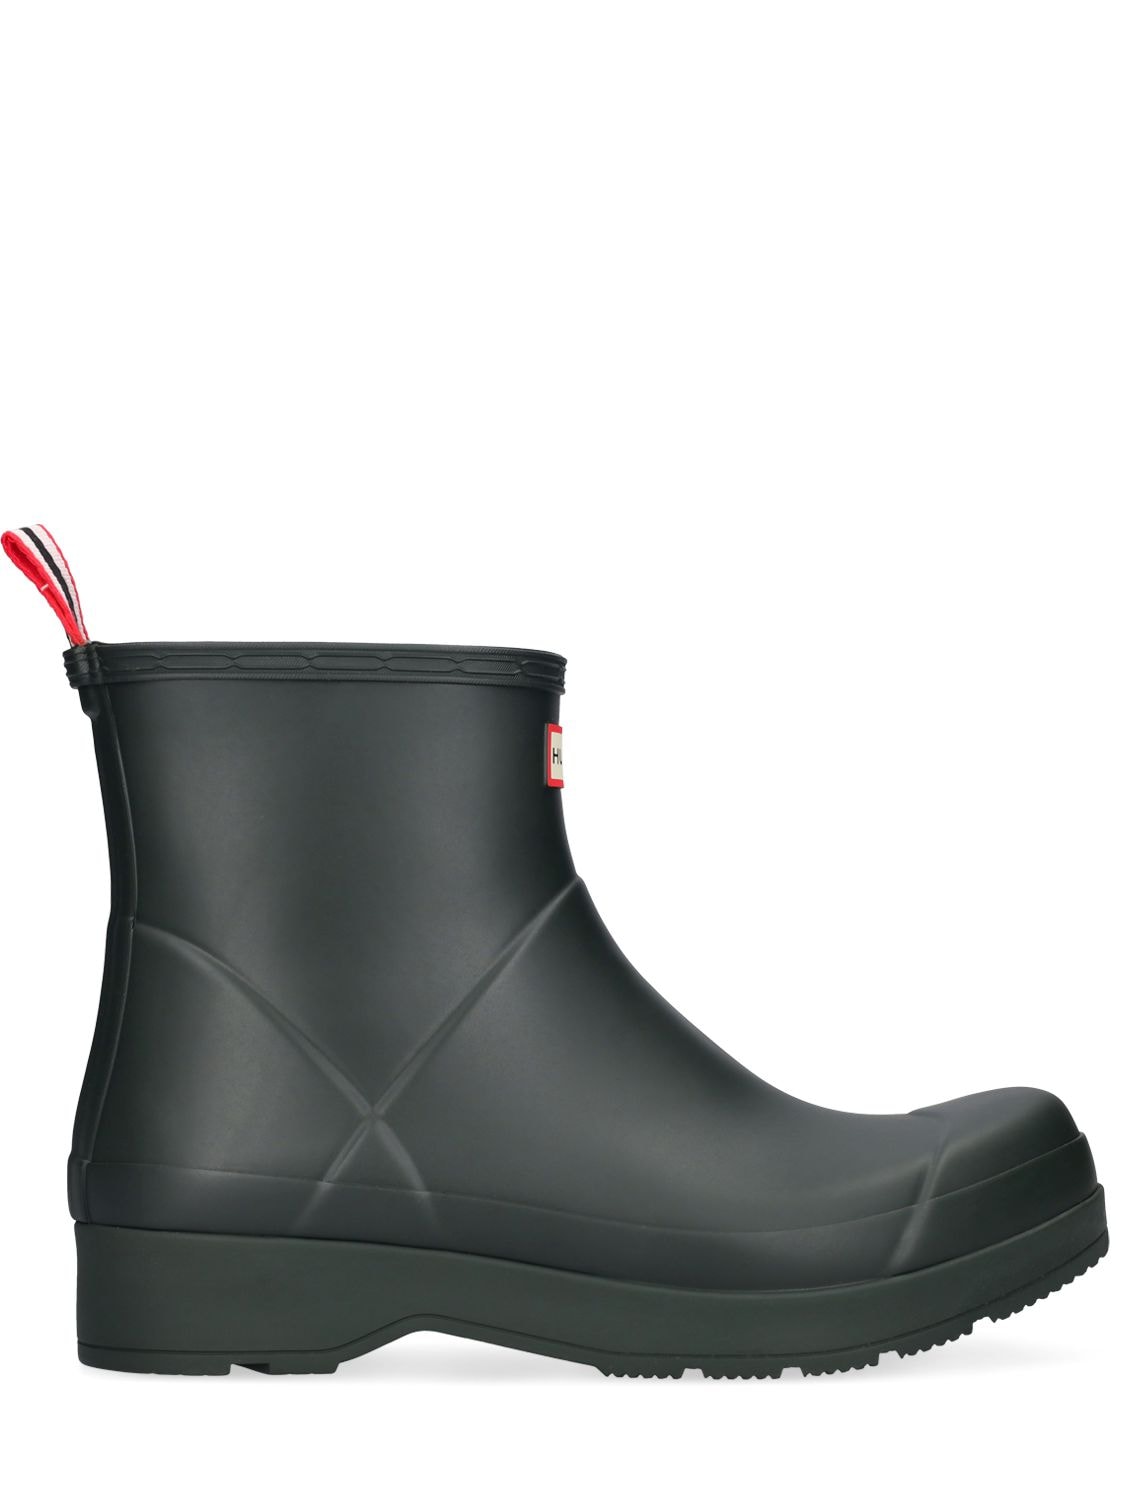 Hunter Double Sole Rubber Boots In Arctic Moss | ModeSens